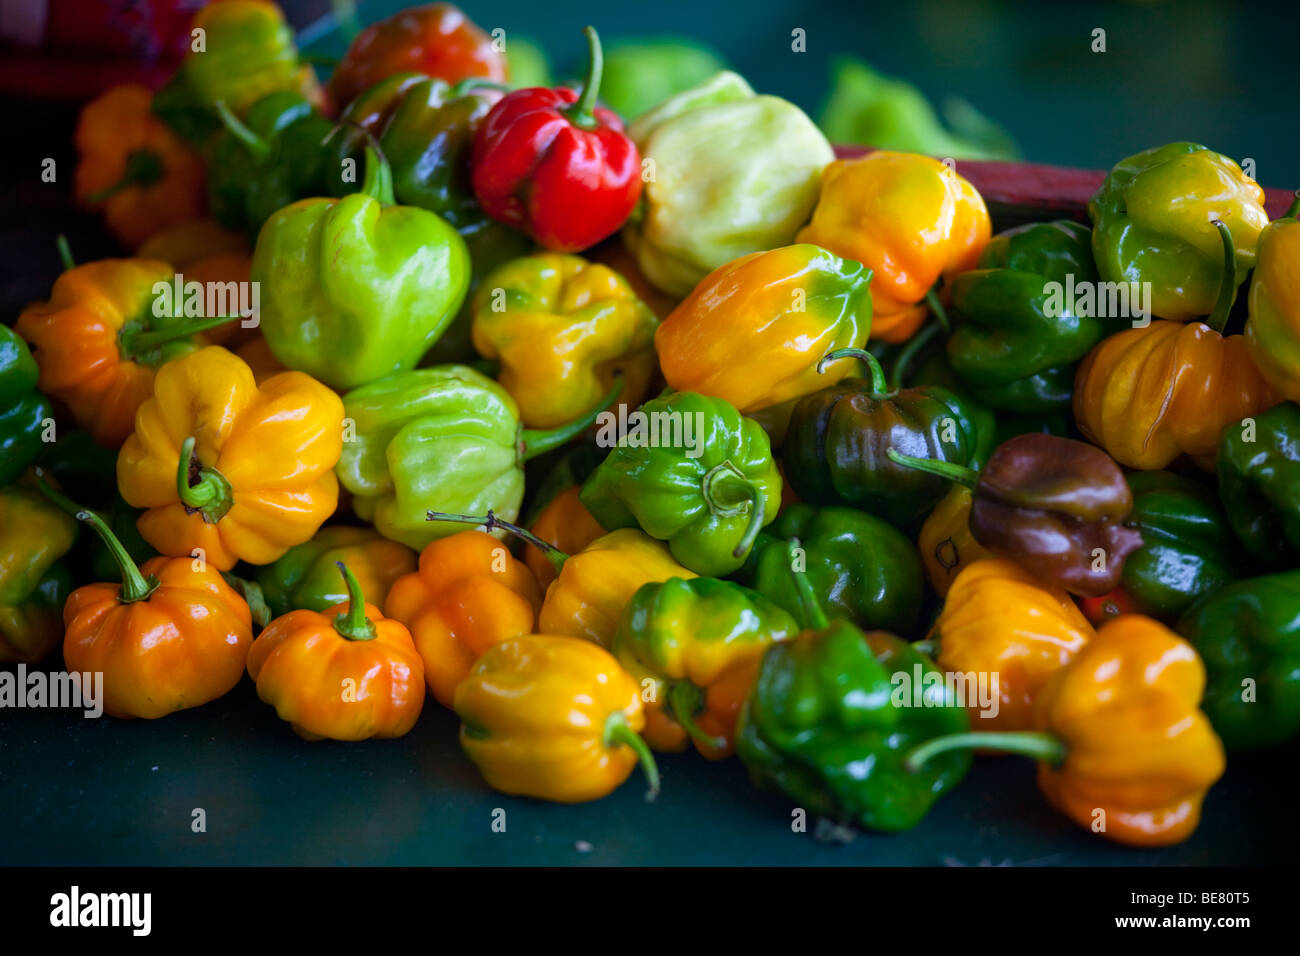 Chilis at a vegetable market in Port of Spain Trinidad Stock Photo